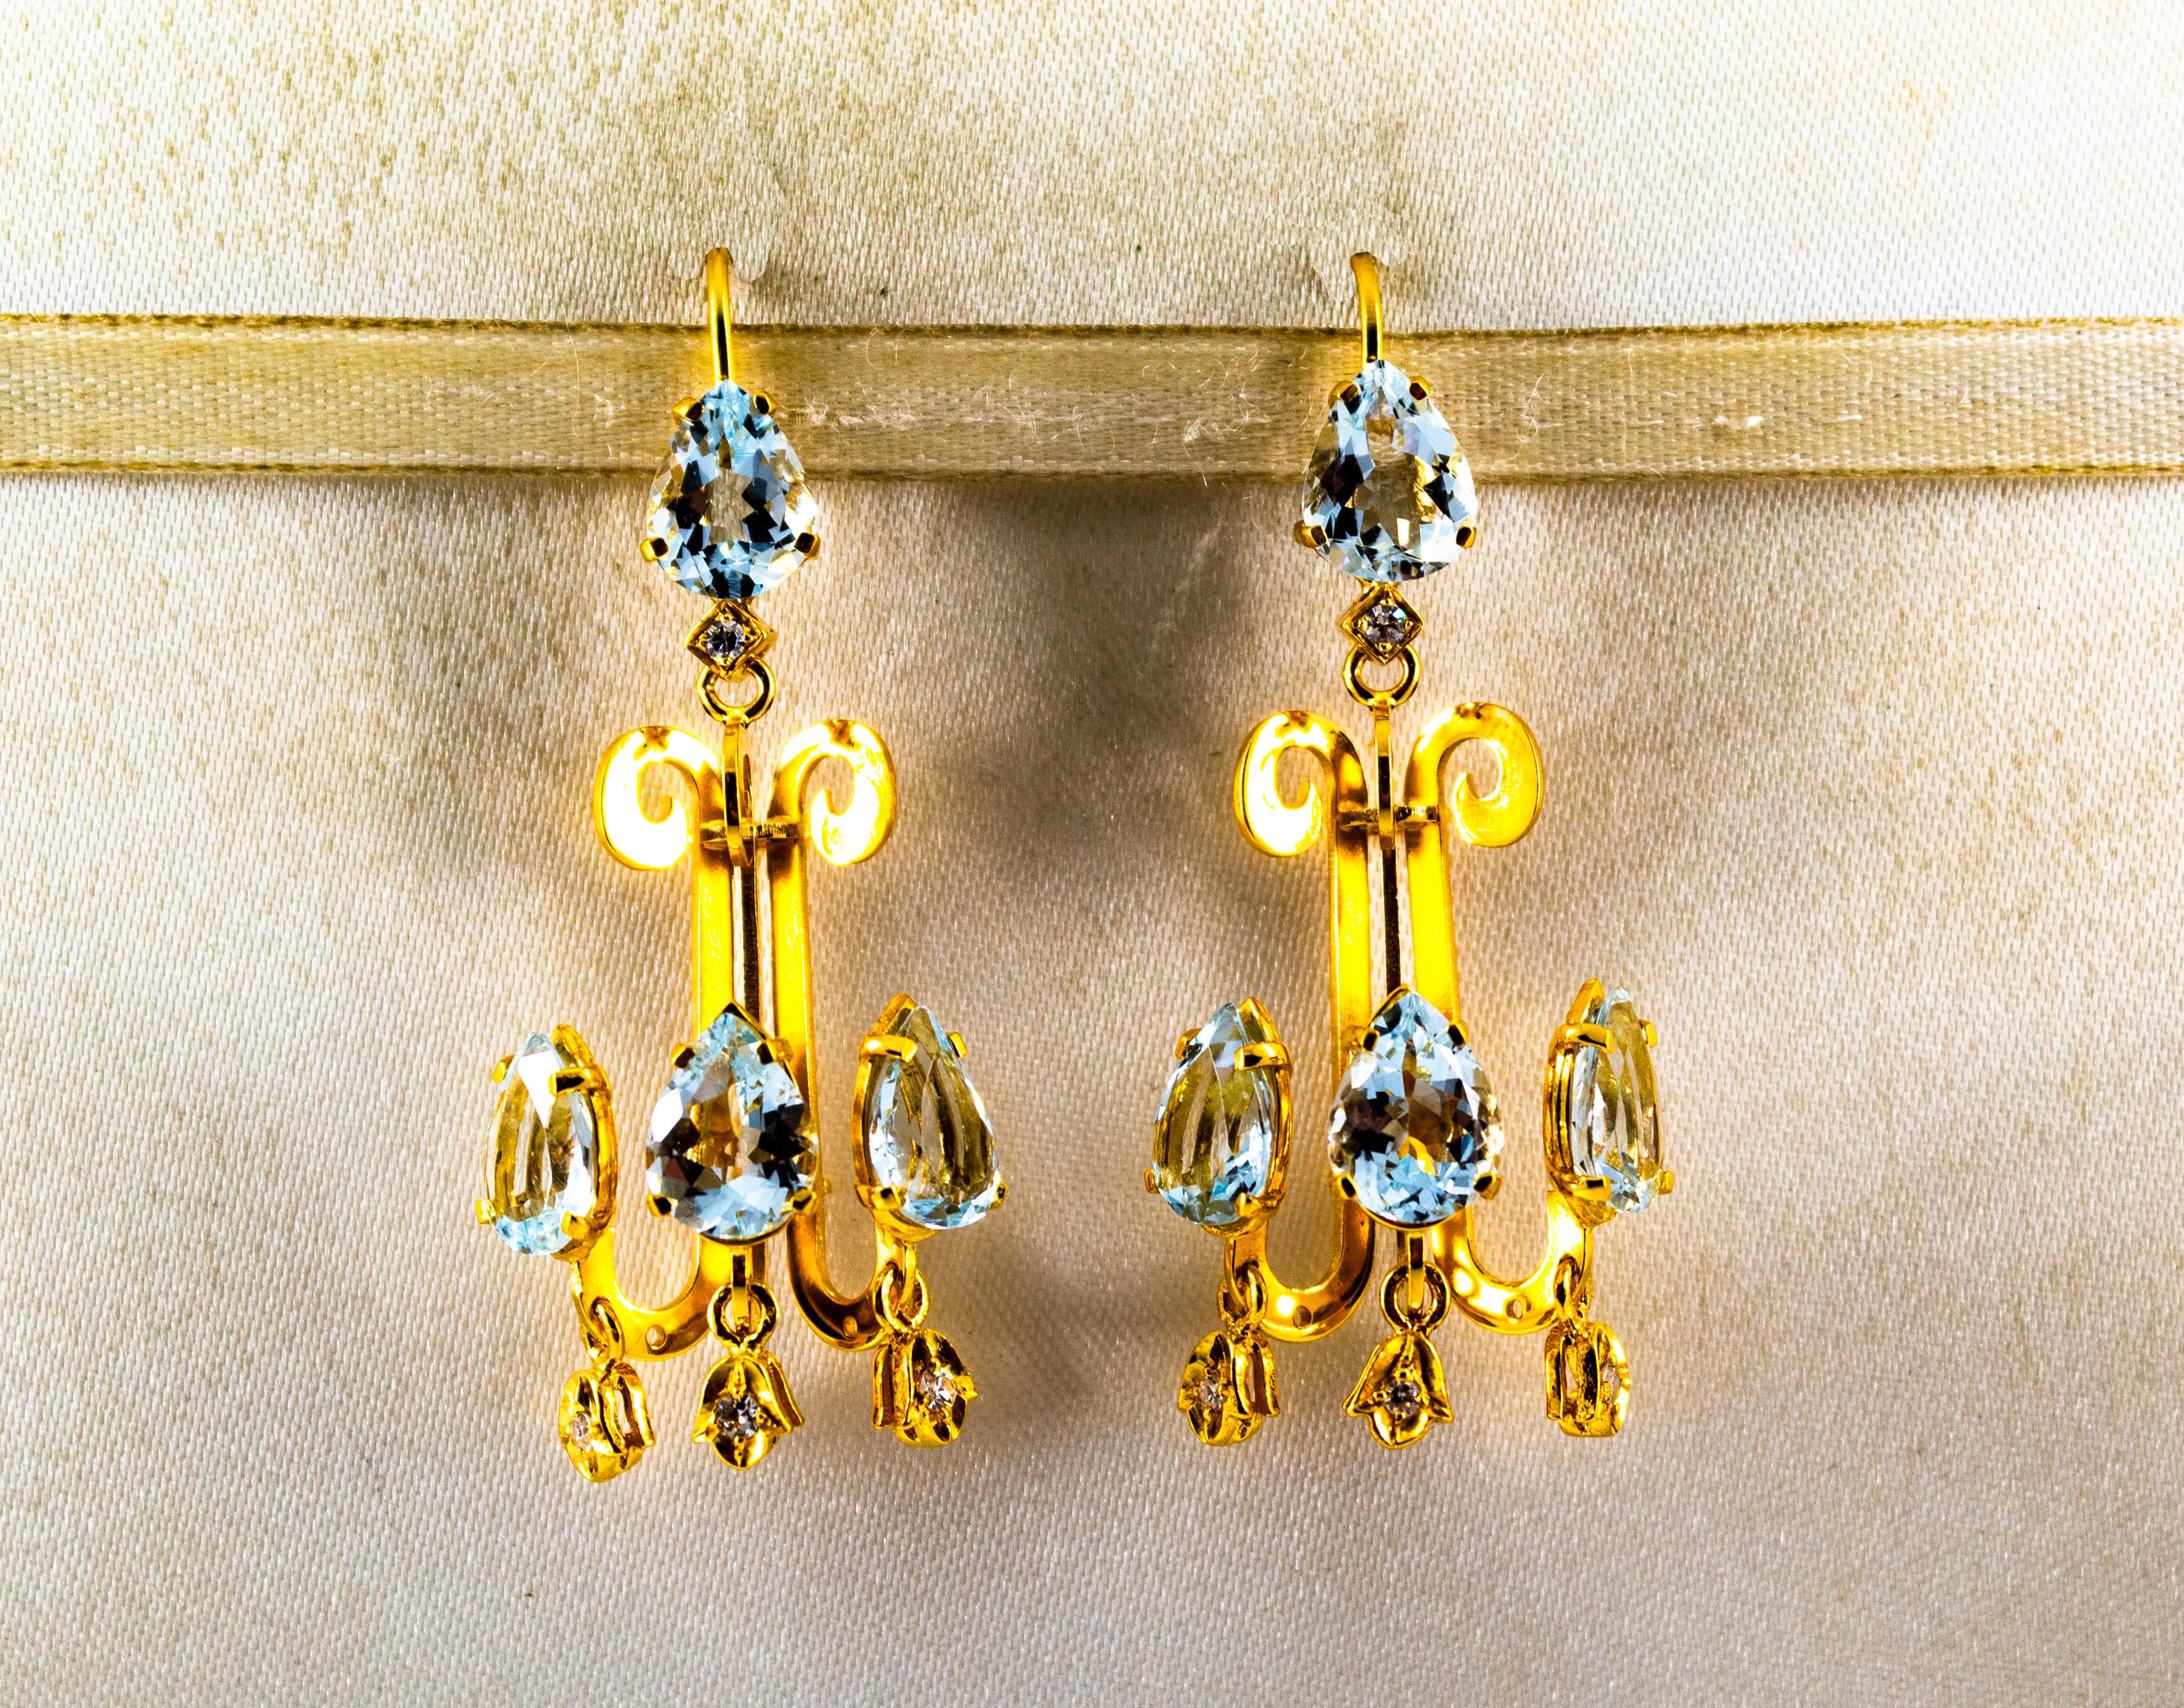 These Stud Earrings are made of 14K Yellow Gold.
These Earrings have 0.16 Carats of White Modern Round Cut Diamonds.
These Earrings have also 10.20 Carats of Aquamarines.
These Earrings are available also with Emeralds.
All our Earrings have pins